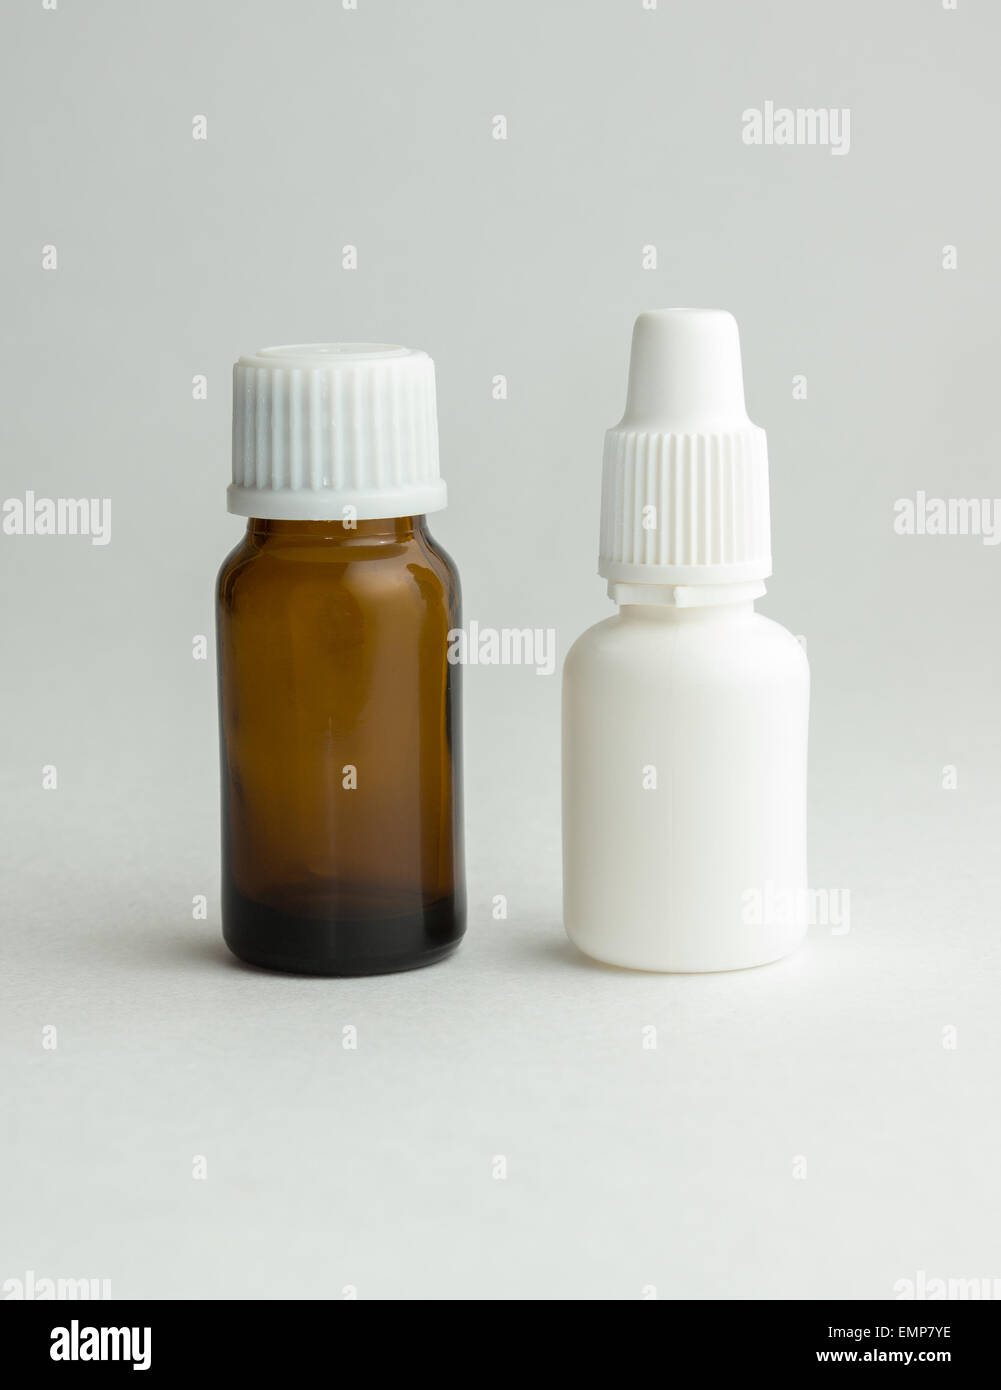 Small bottle from dark glass with a white cover and tablets. Stock Photo